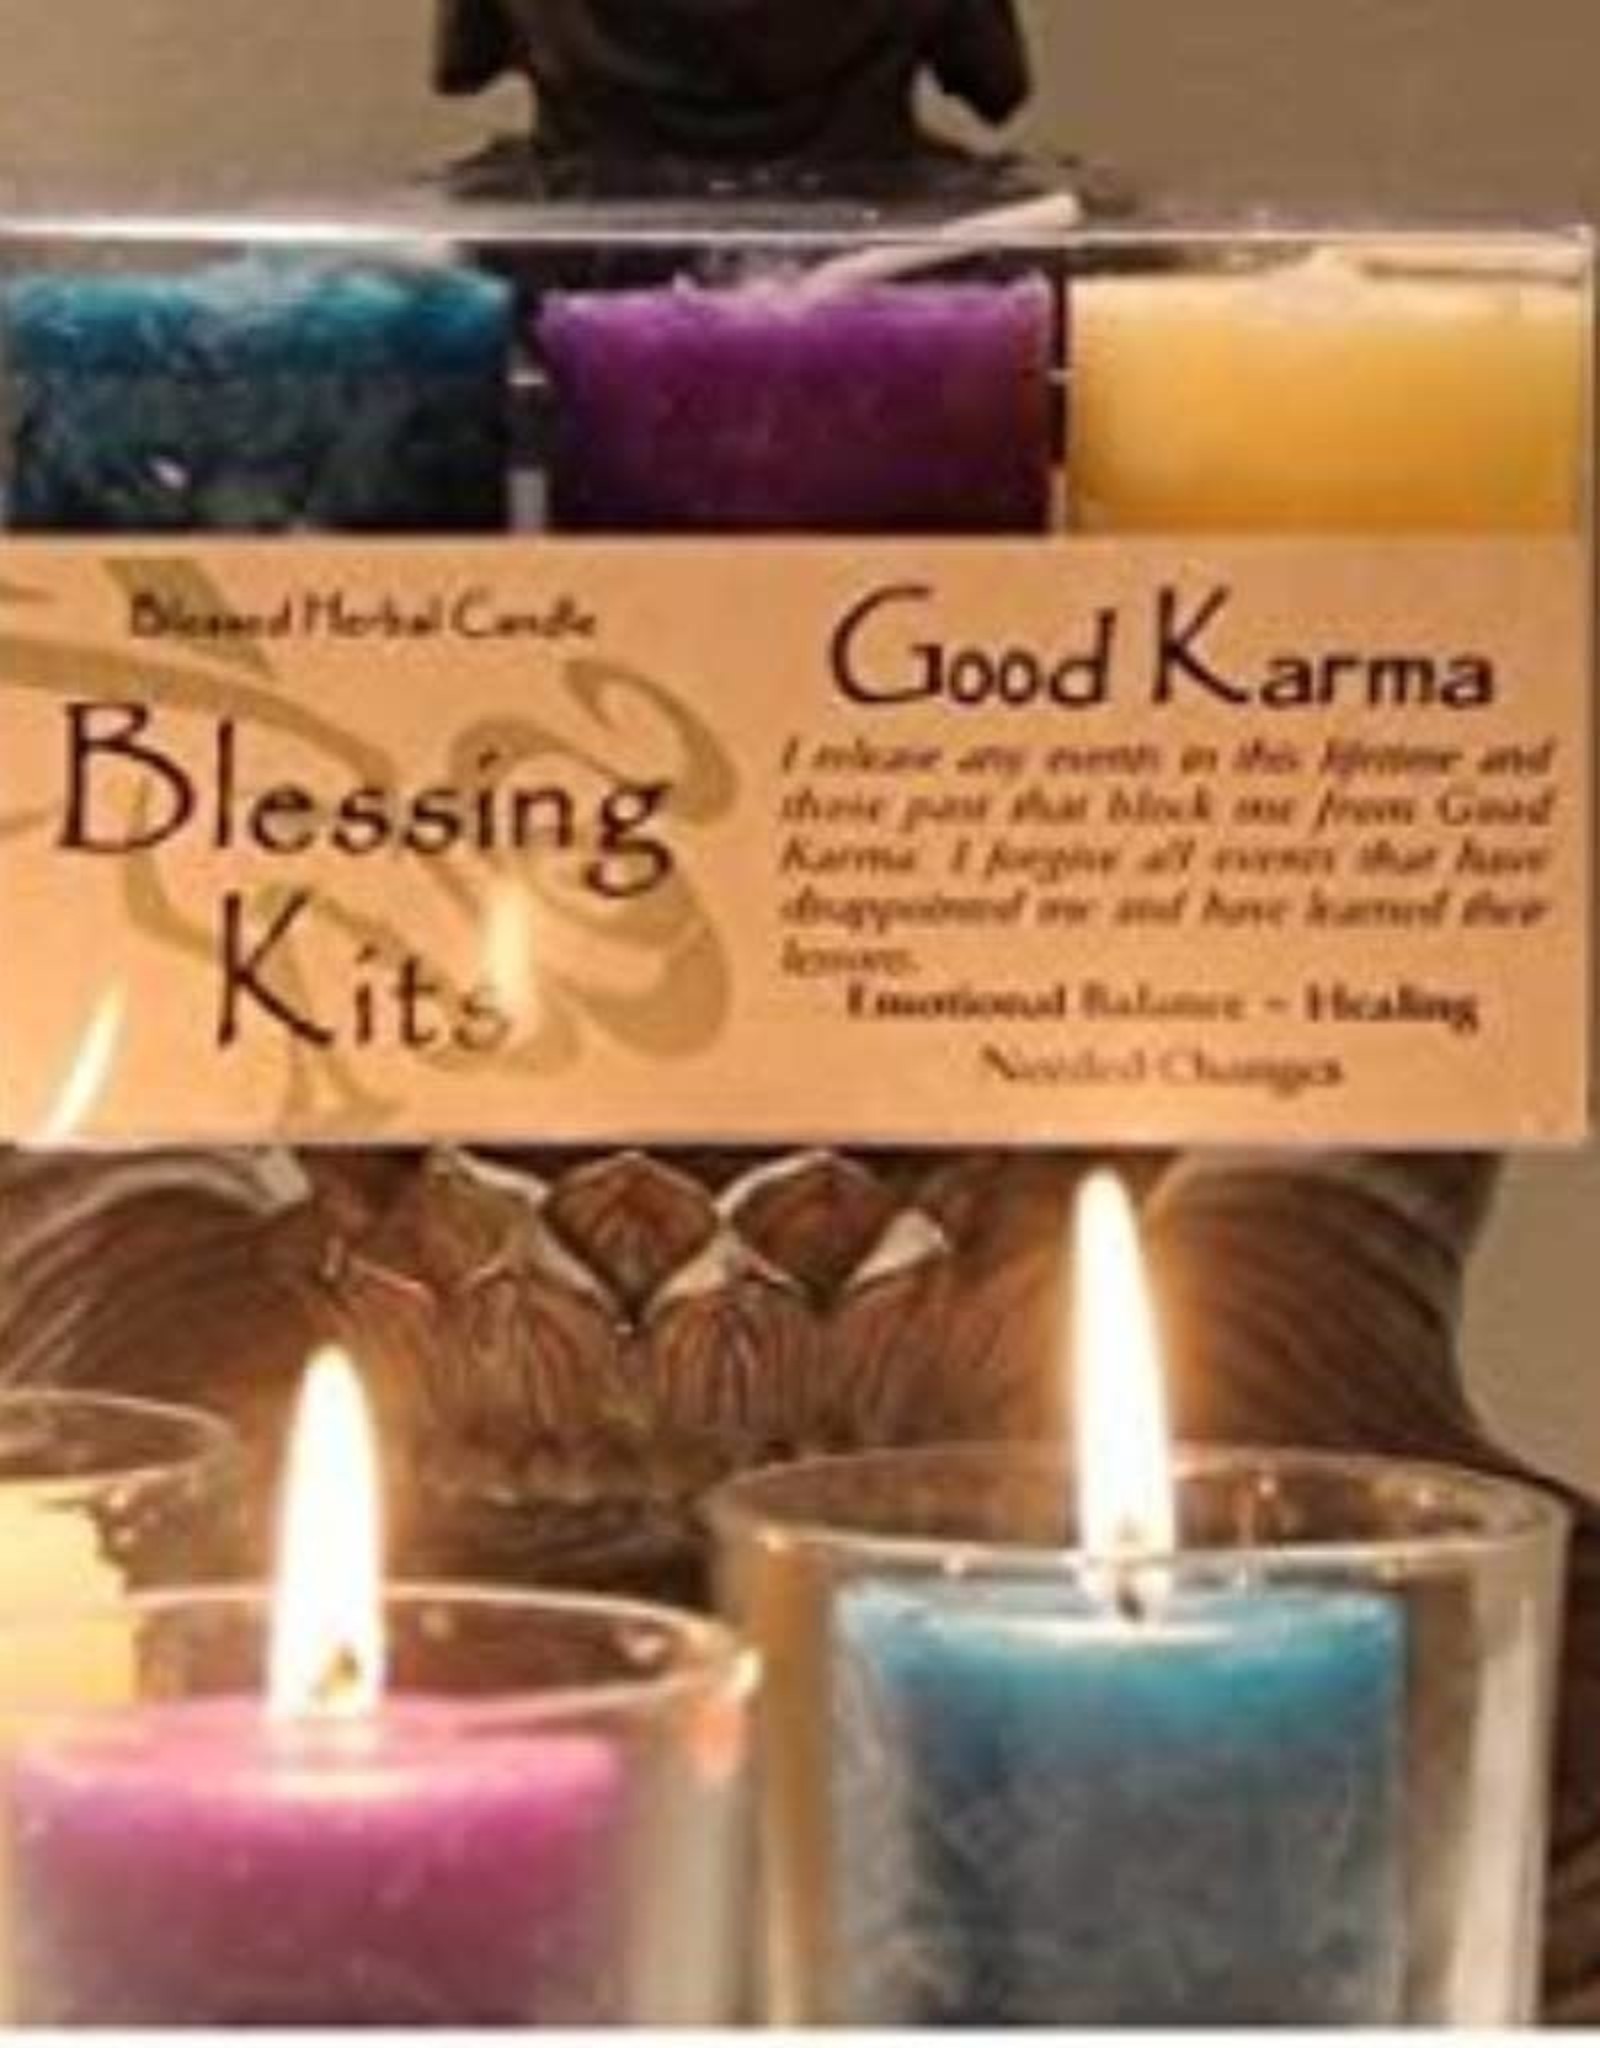 Coventry Creations Candle Blessing Kits - Good Karma